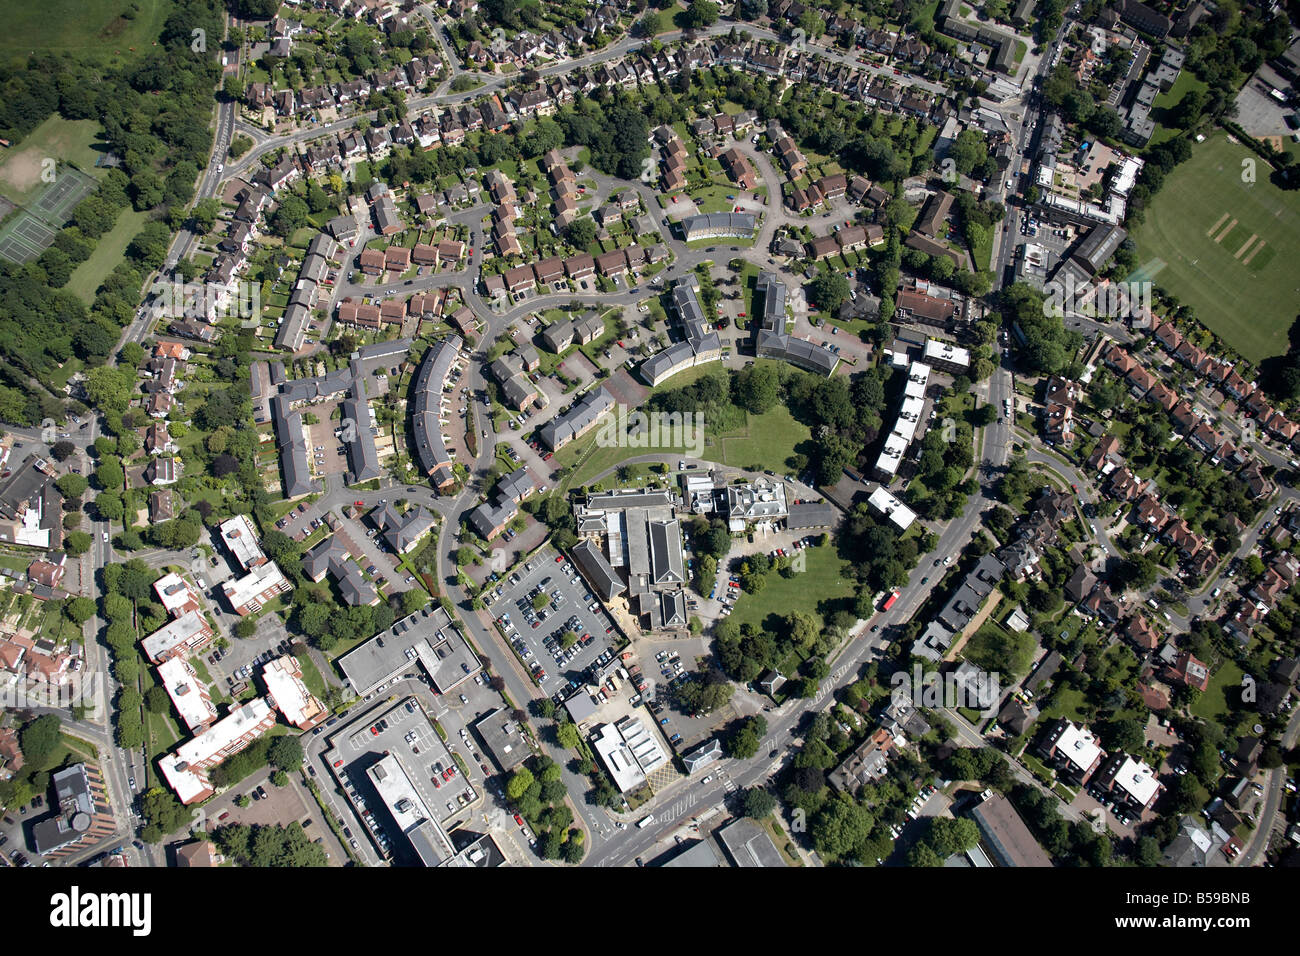 Aerial view south east of suburban houses Southgate Fire Station sports grounds High Street The Bourne A111 Road Barnet London N Stock Photo